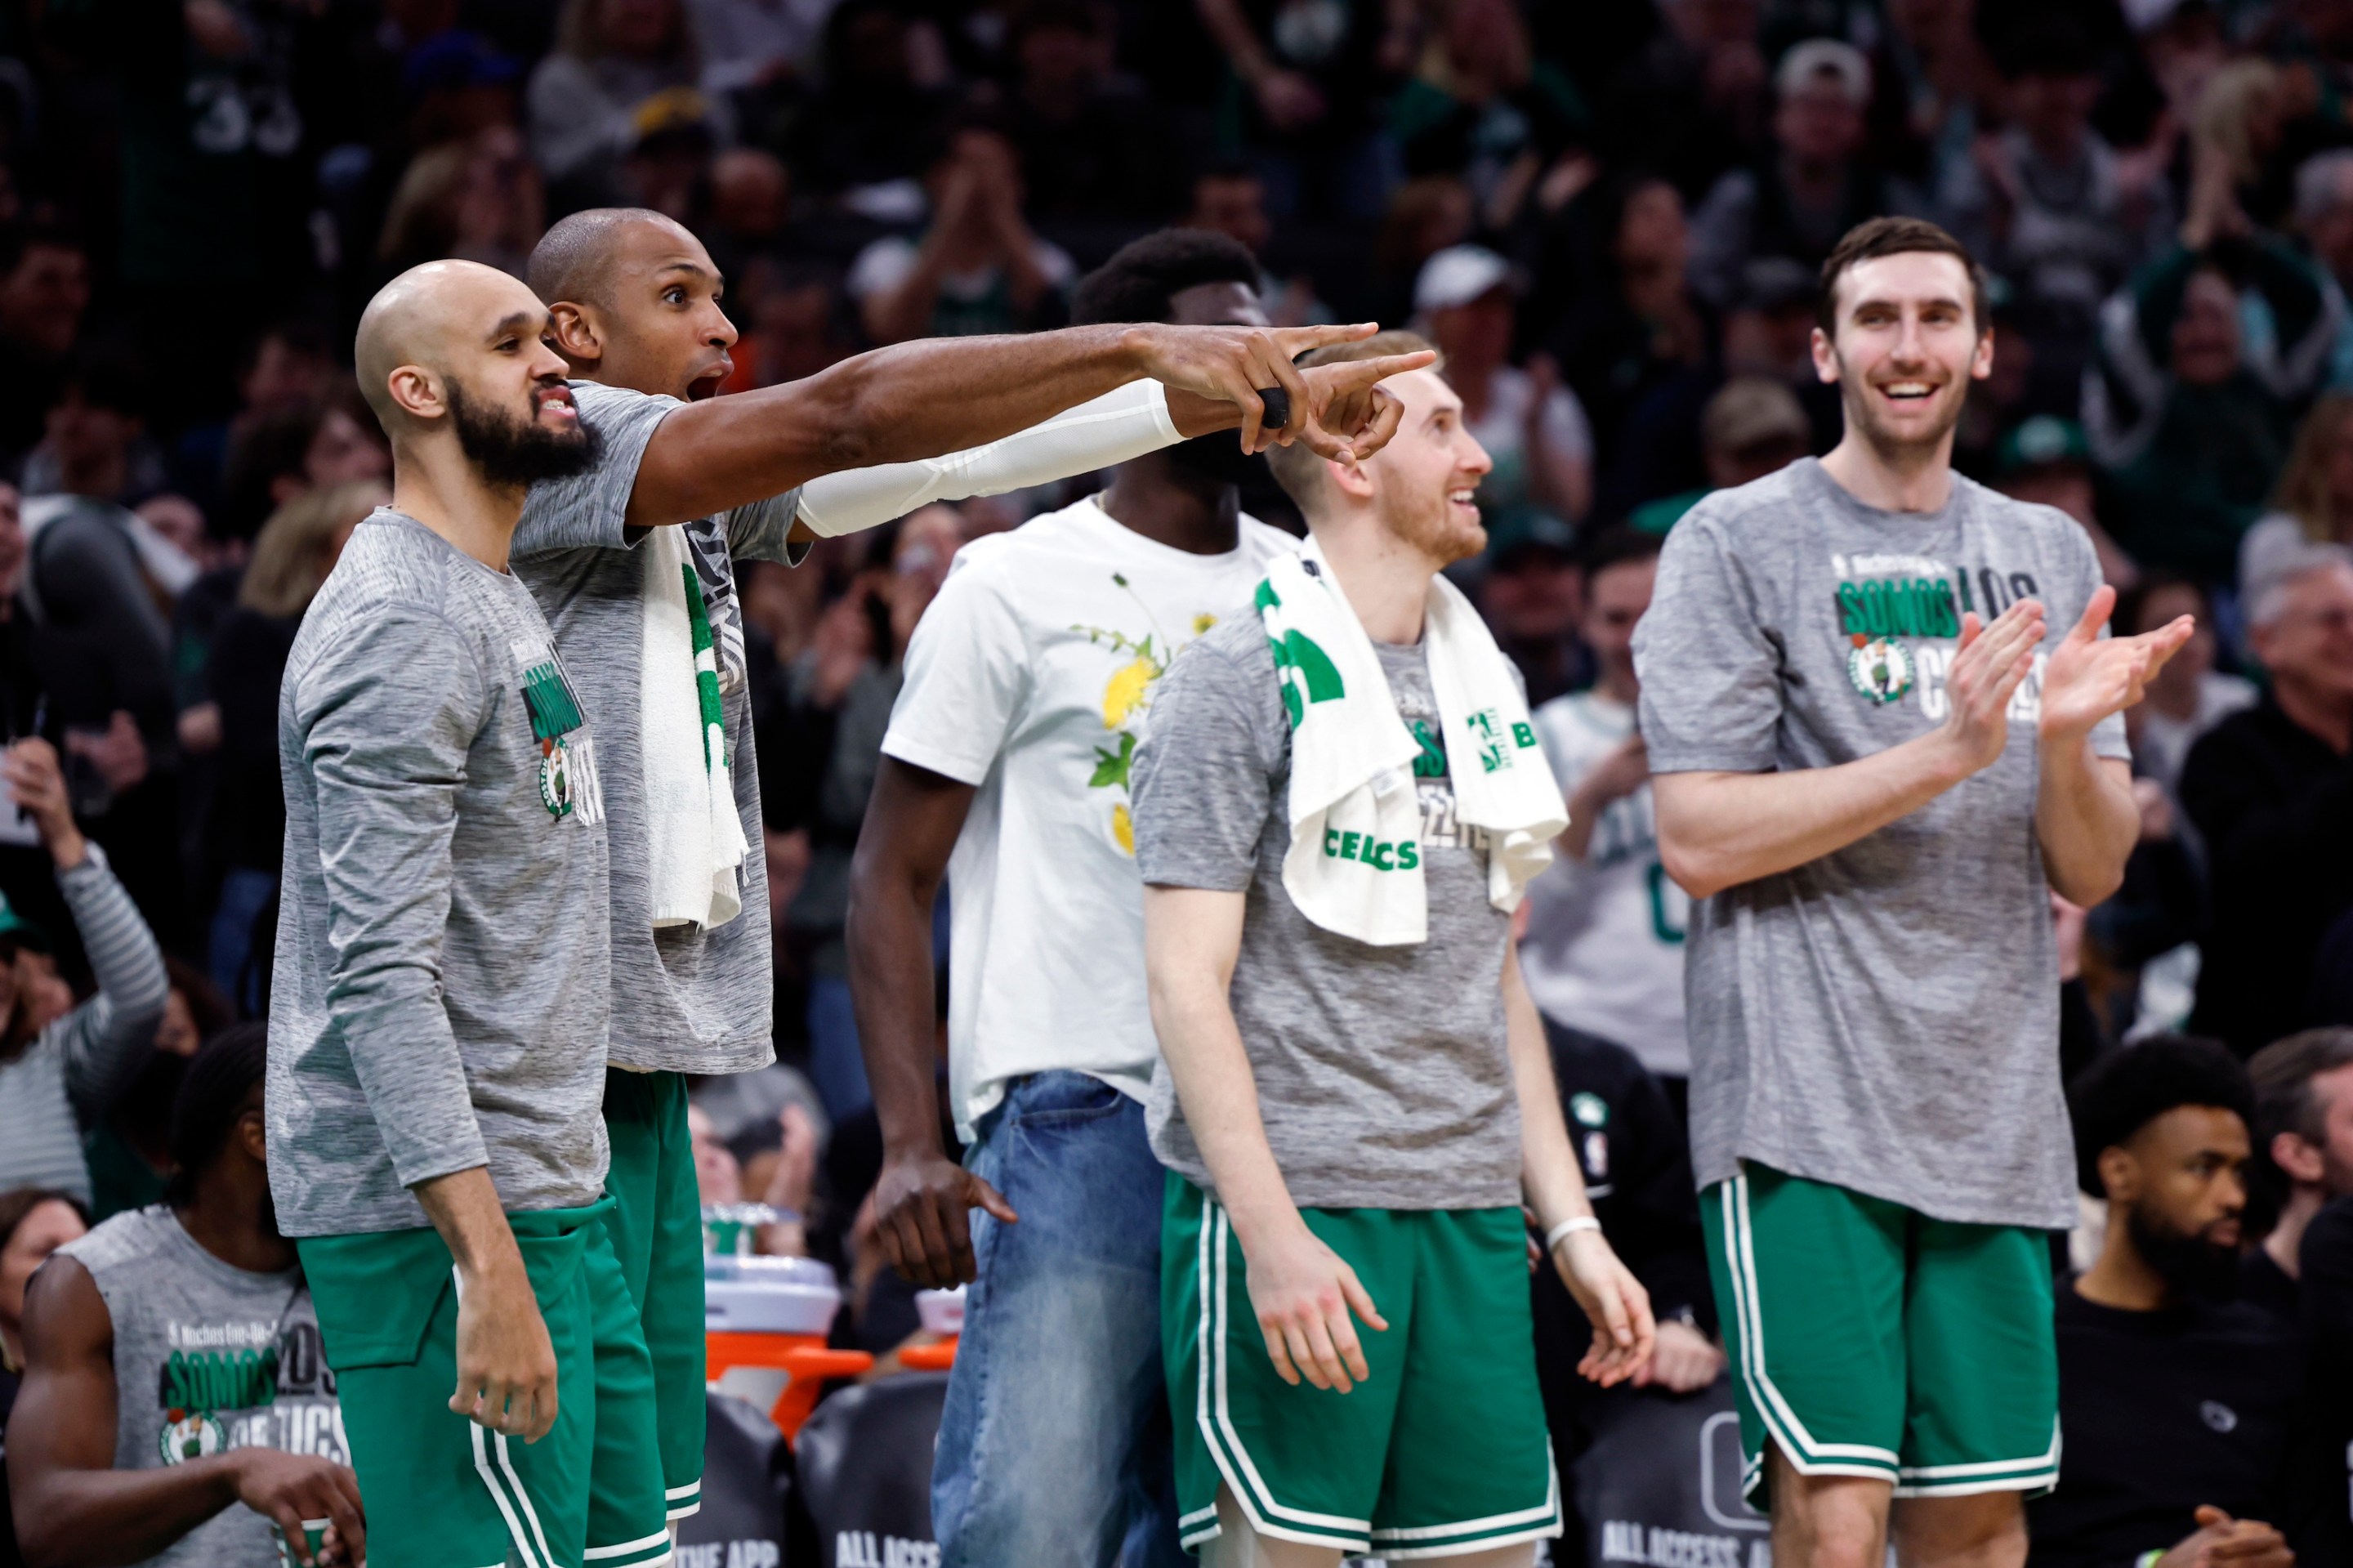 Boston Celtics center Al Horford (second from left) and the bench react to a slam dunk by Boston Celtics guard Svi Mykhailiuk (not pictured) in the fourth quarter. The Celtics beat the Golden State Warriors, 140-88.